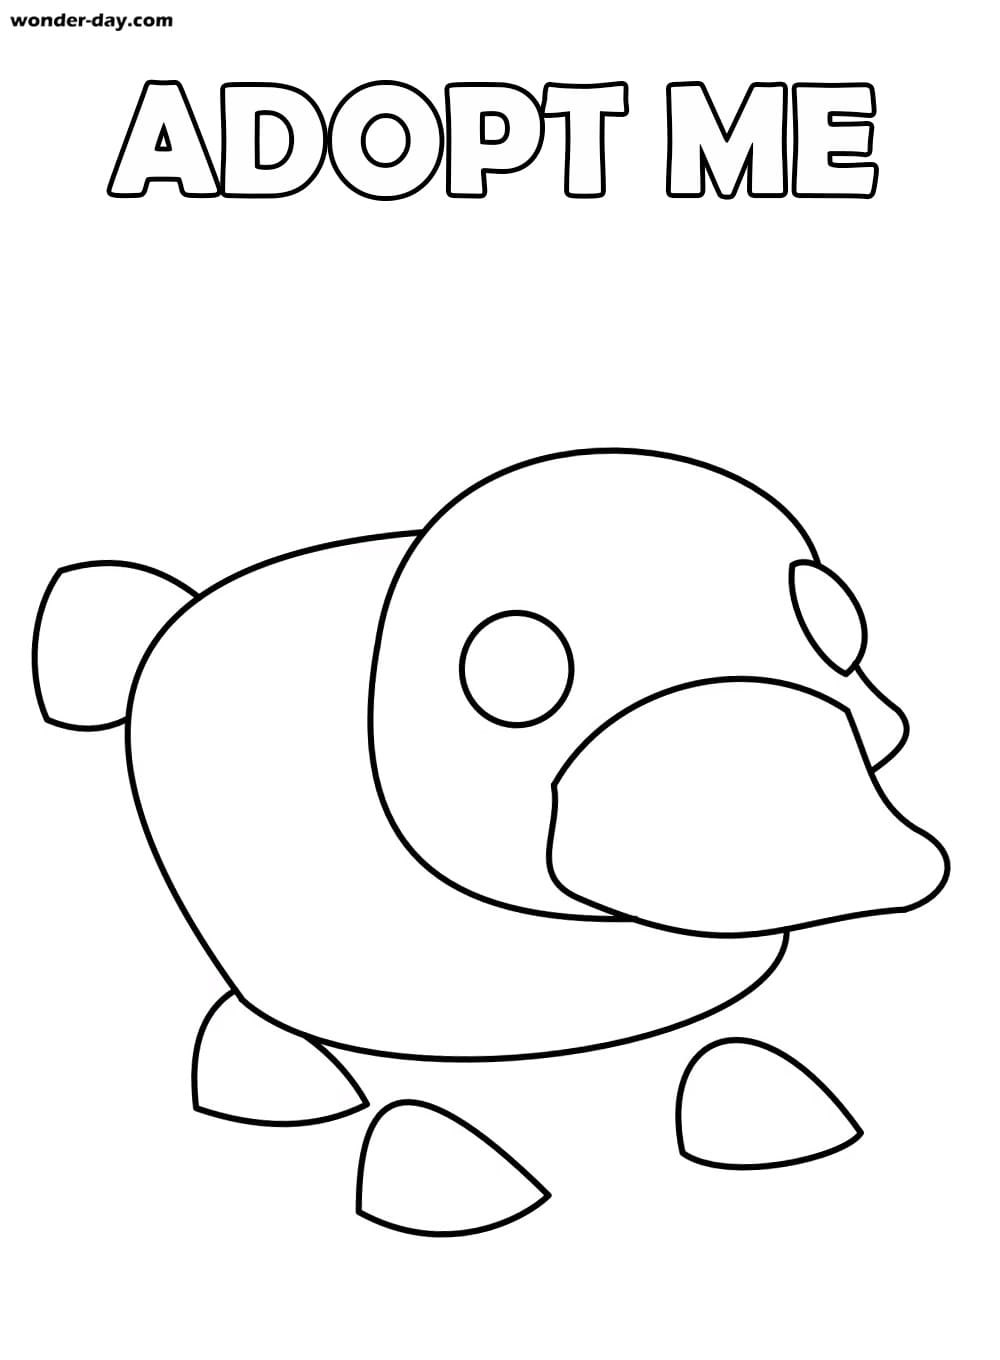 Adopt Me Coloring Pages Wonder Day Com - roblox adopt me dog coloring pages